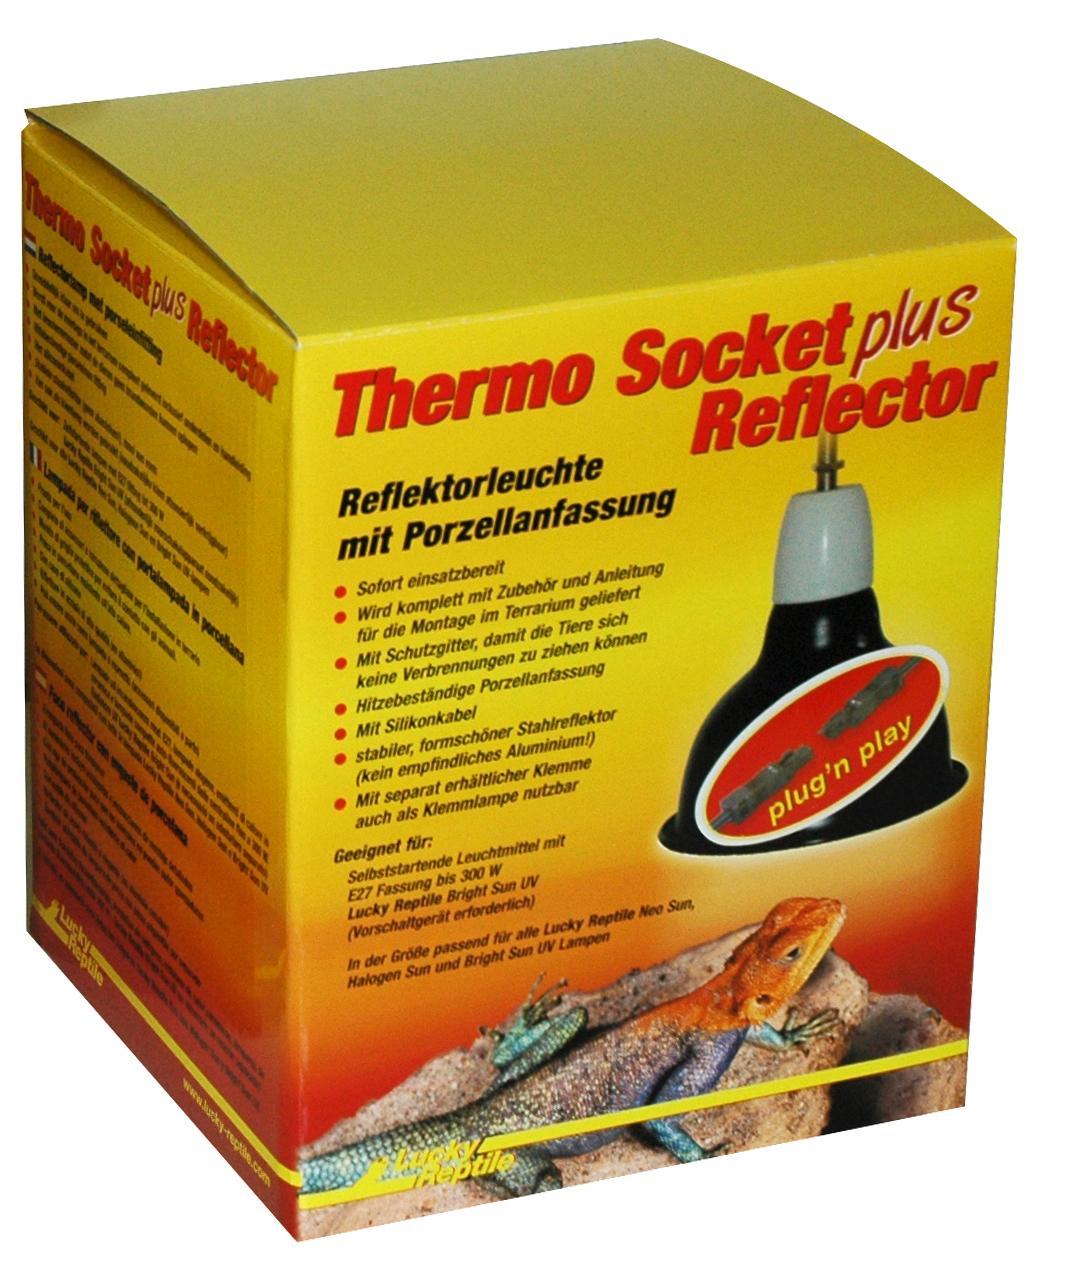 Import-Export Peter Hoch GmbH Thermo Socket mit Reflector PRO